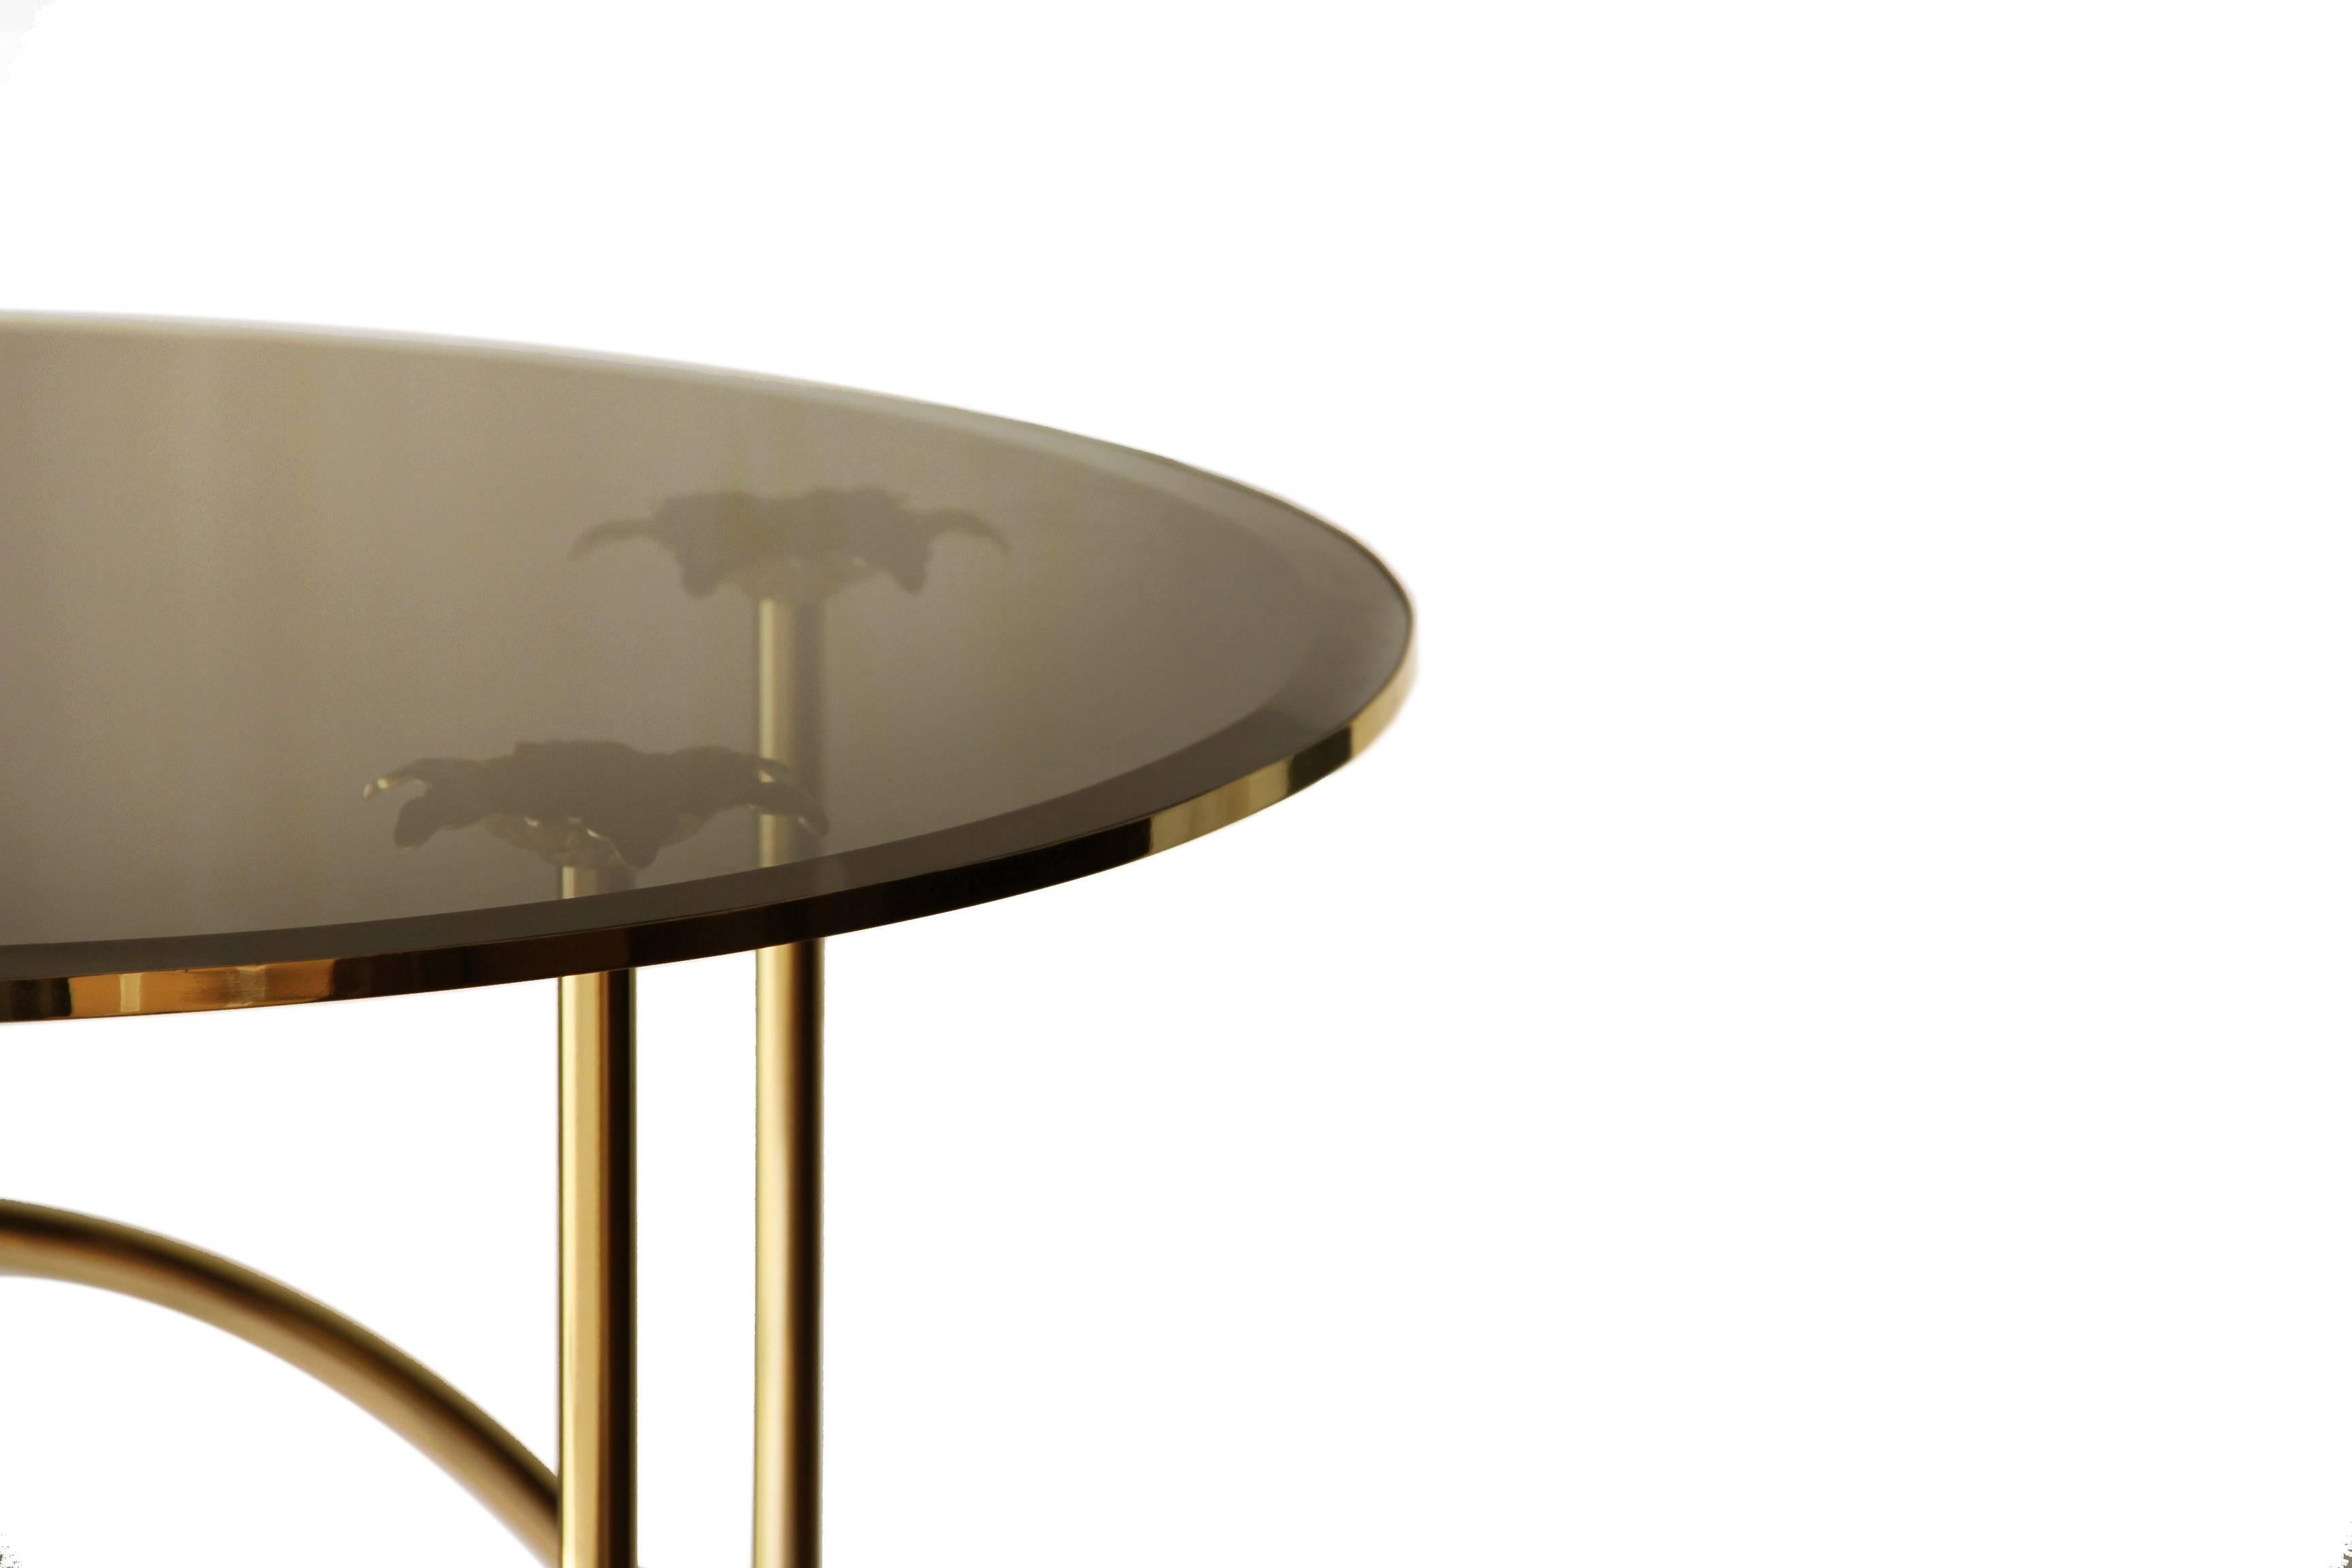 The Kiki side table evokes the romantic and seductive beauty of Parisian cabaret life. The revealing frilled undergarments, the surprise high kicks, hoops in a circle accompanied by blinding splendor give this table a sassy new spin on design.